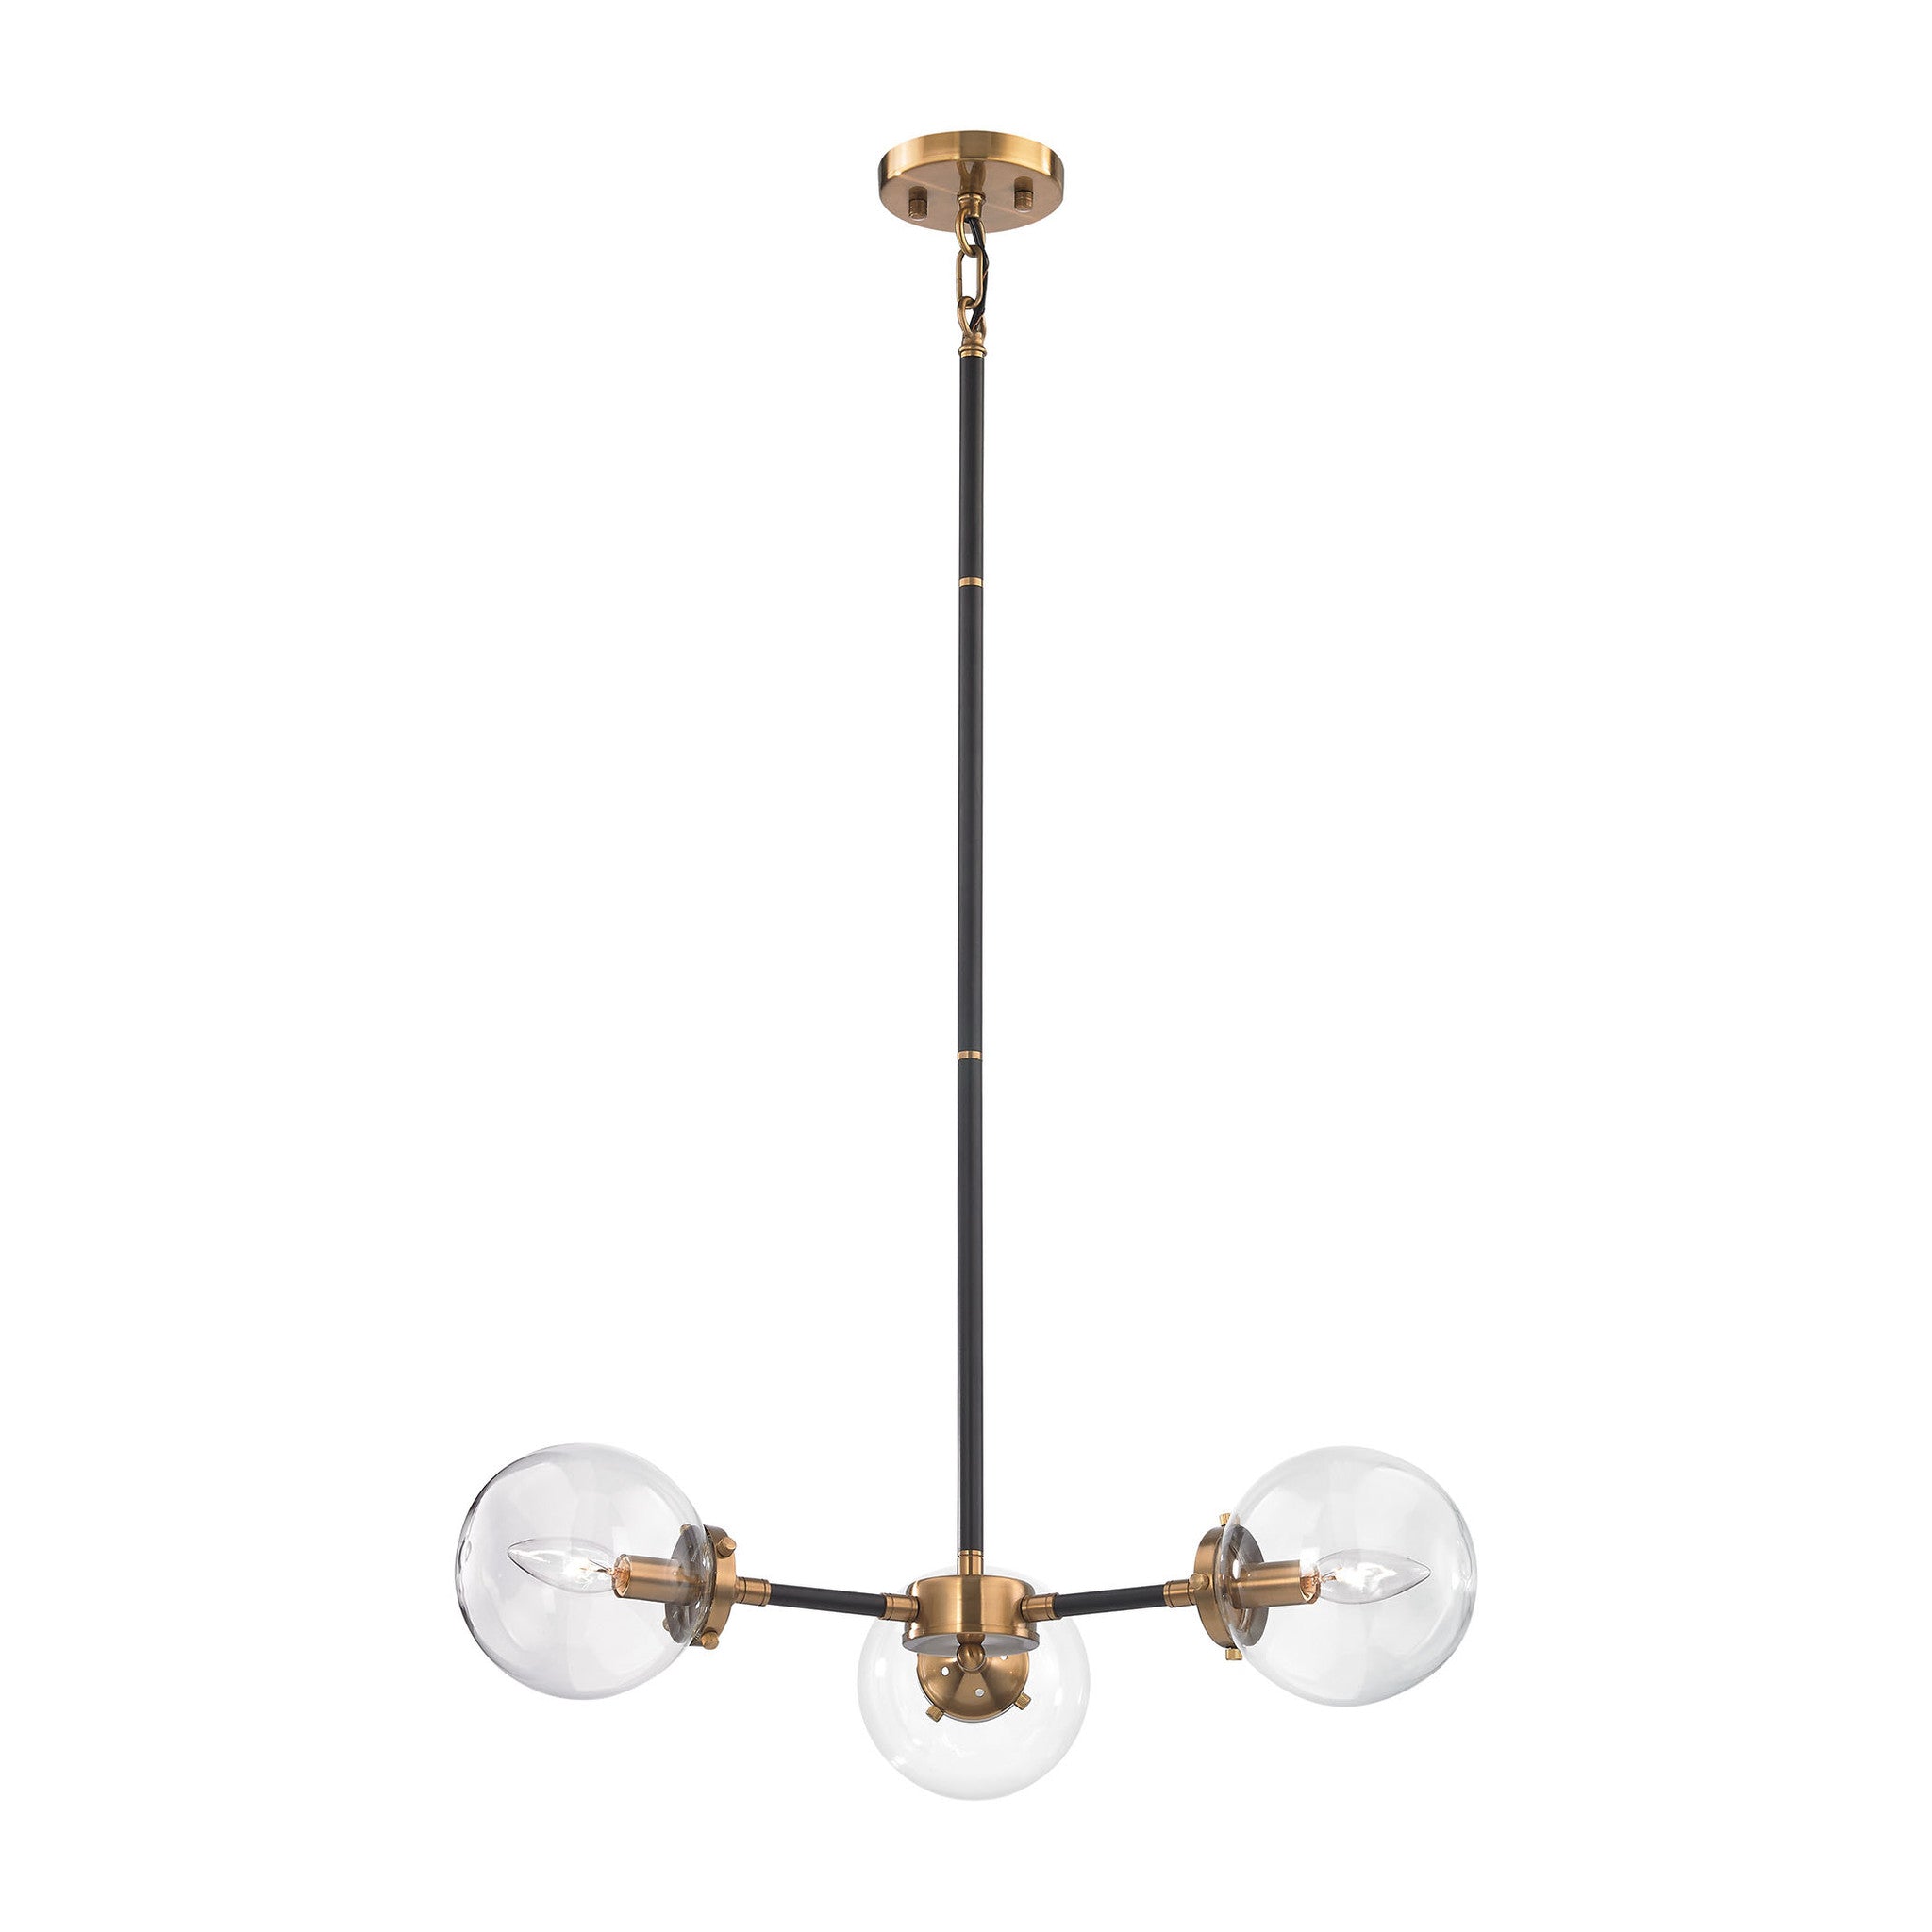 Mid-Century Modern 3 Light Nyx Chandelier in Matte Black and Antique Gold with Clear Glass Globe Shades